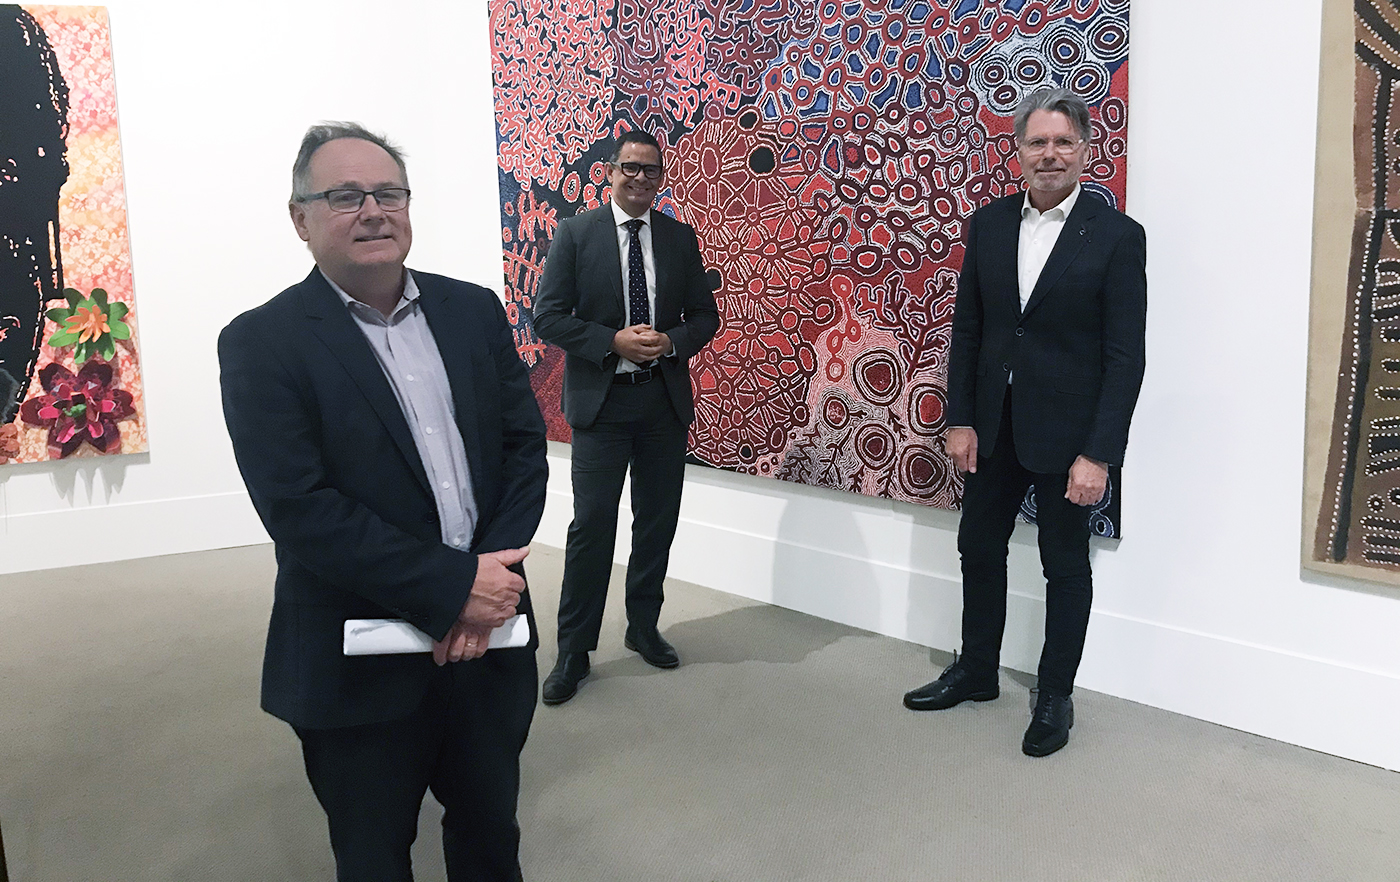 Culture and Arts Minister David Templeman, Aboriginal Affairs Minister Ben Wyatt and AGWA Foundation Chair, Warwick Hemsley in the Art Gallery of Western Australia.